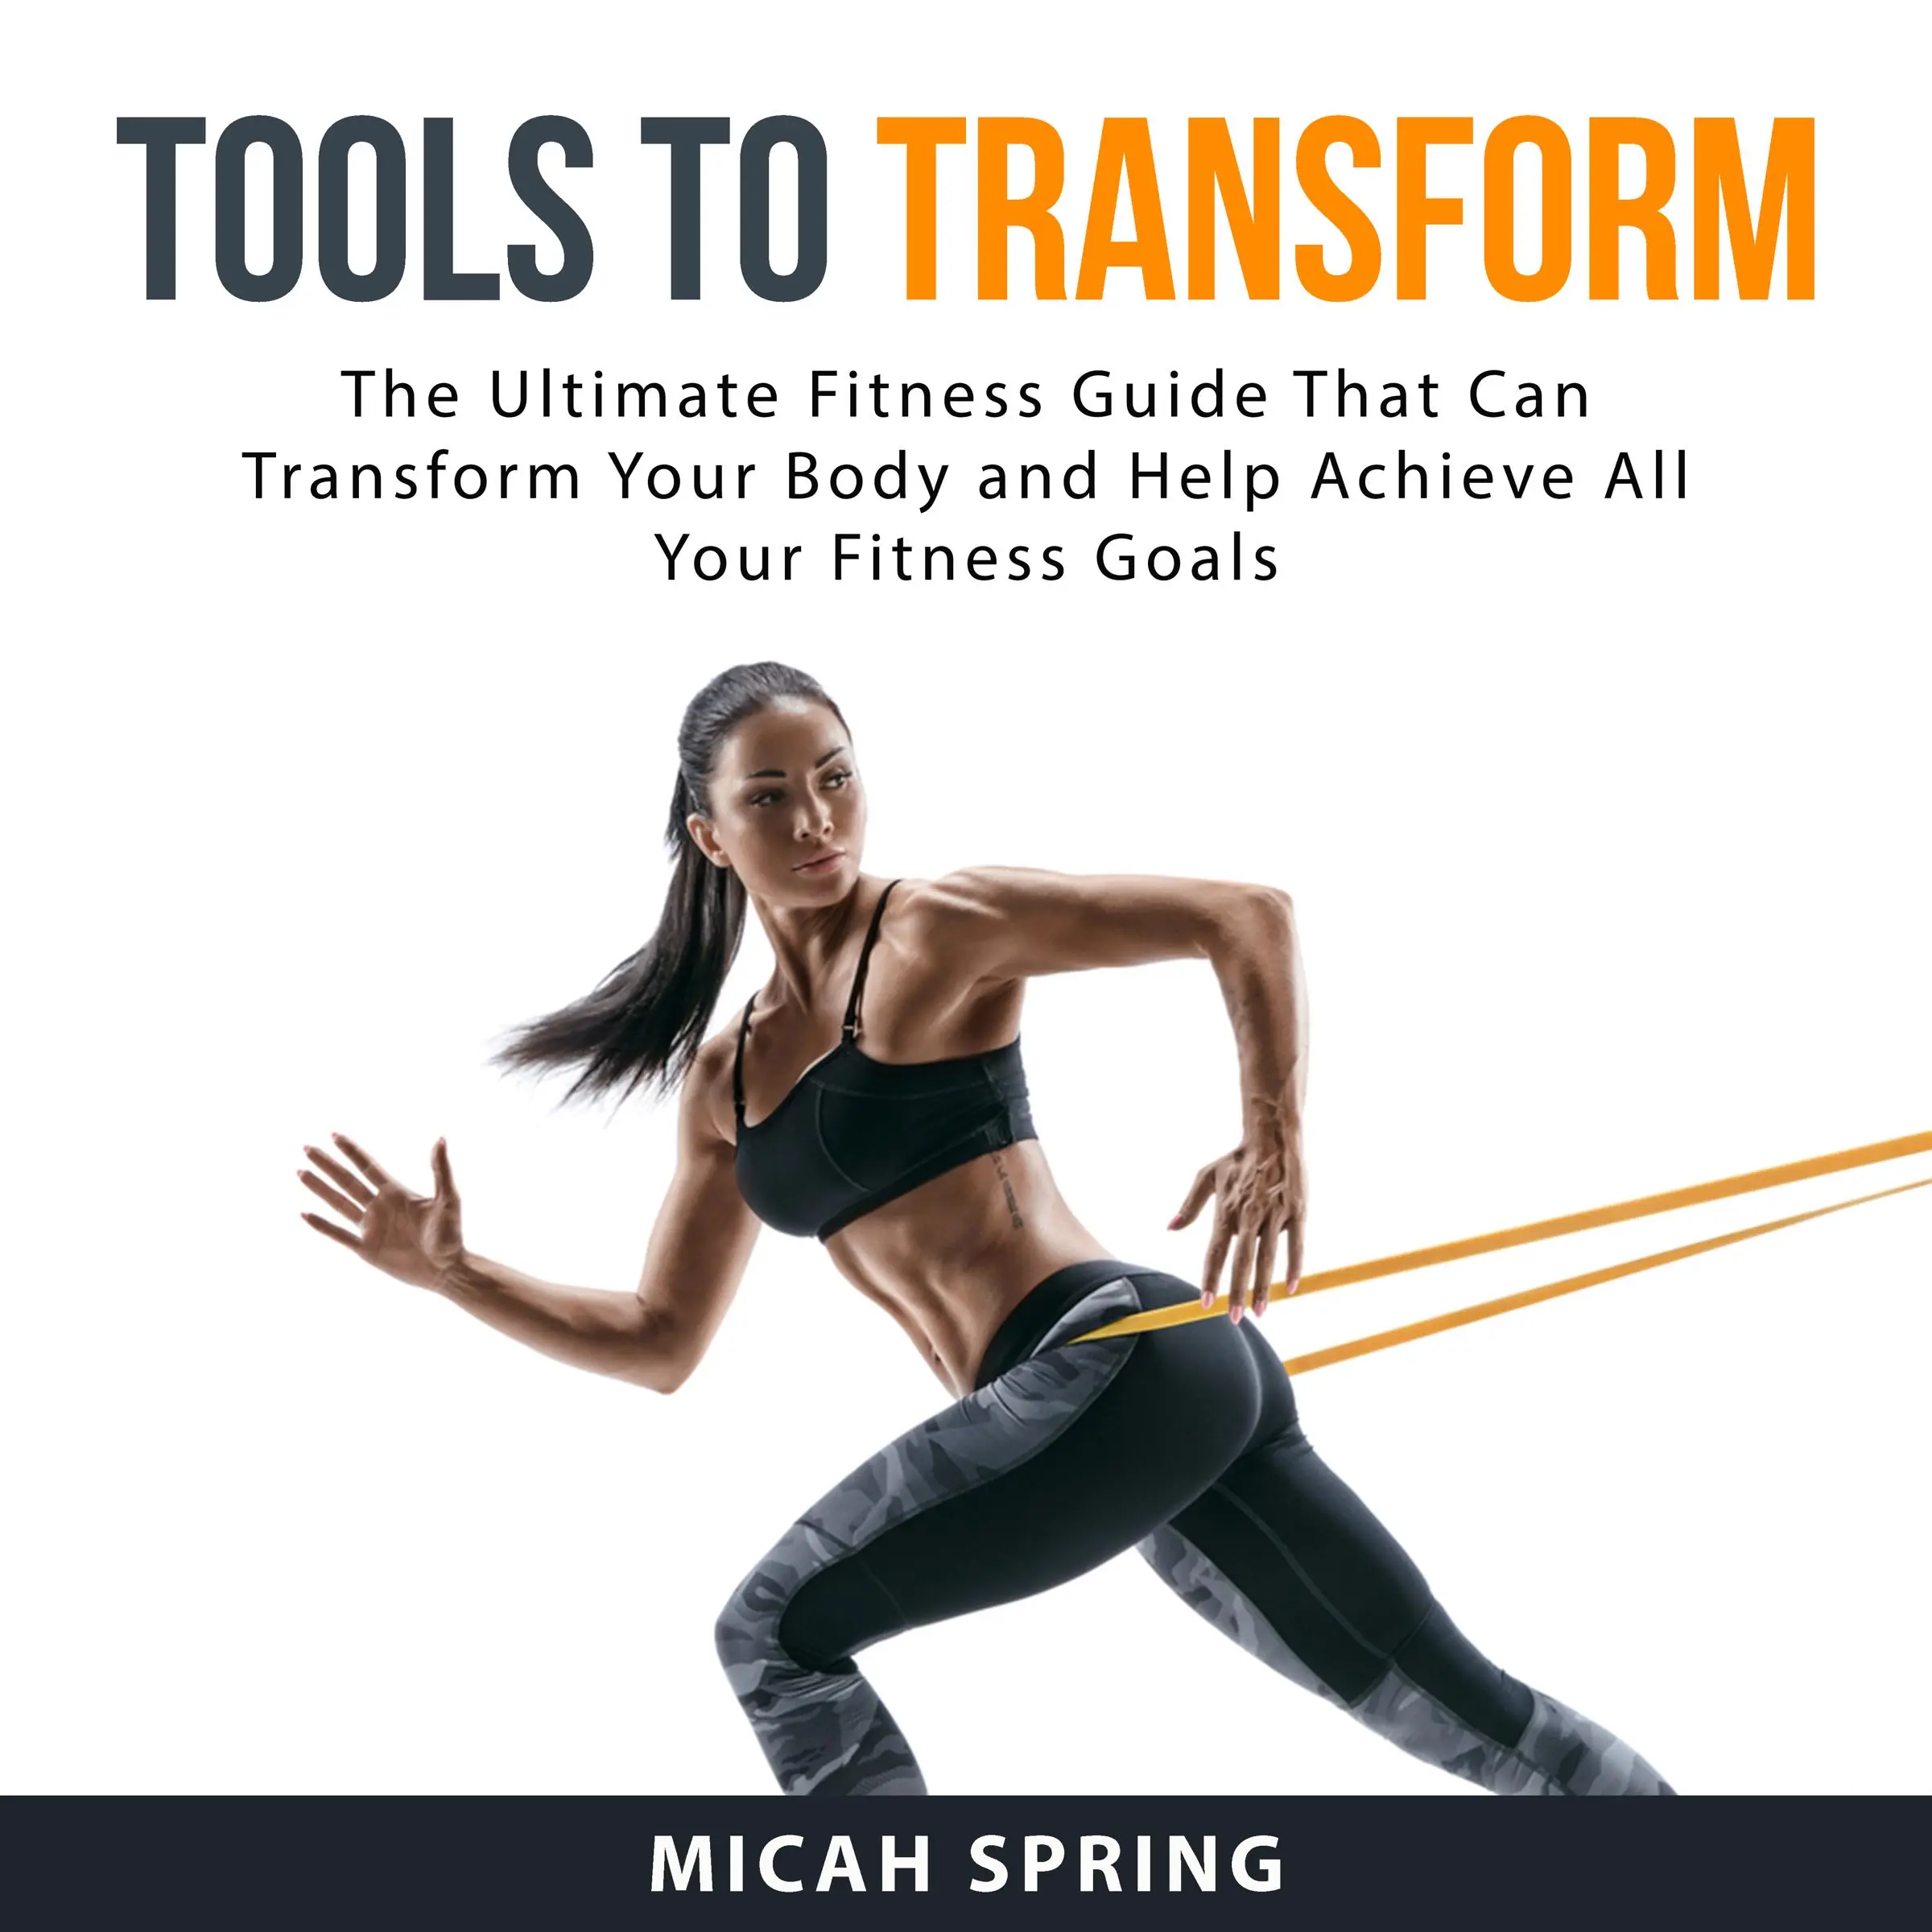 Tools to Transform: The Ultimate Fitness Guide That Can Transform Your Body and Help Achieve All Your Fitness Goals Audiobook by Micah Spring